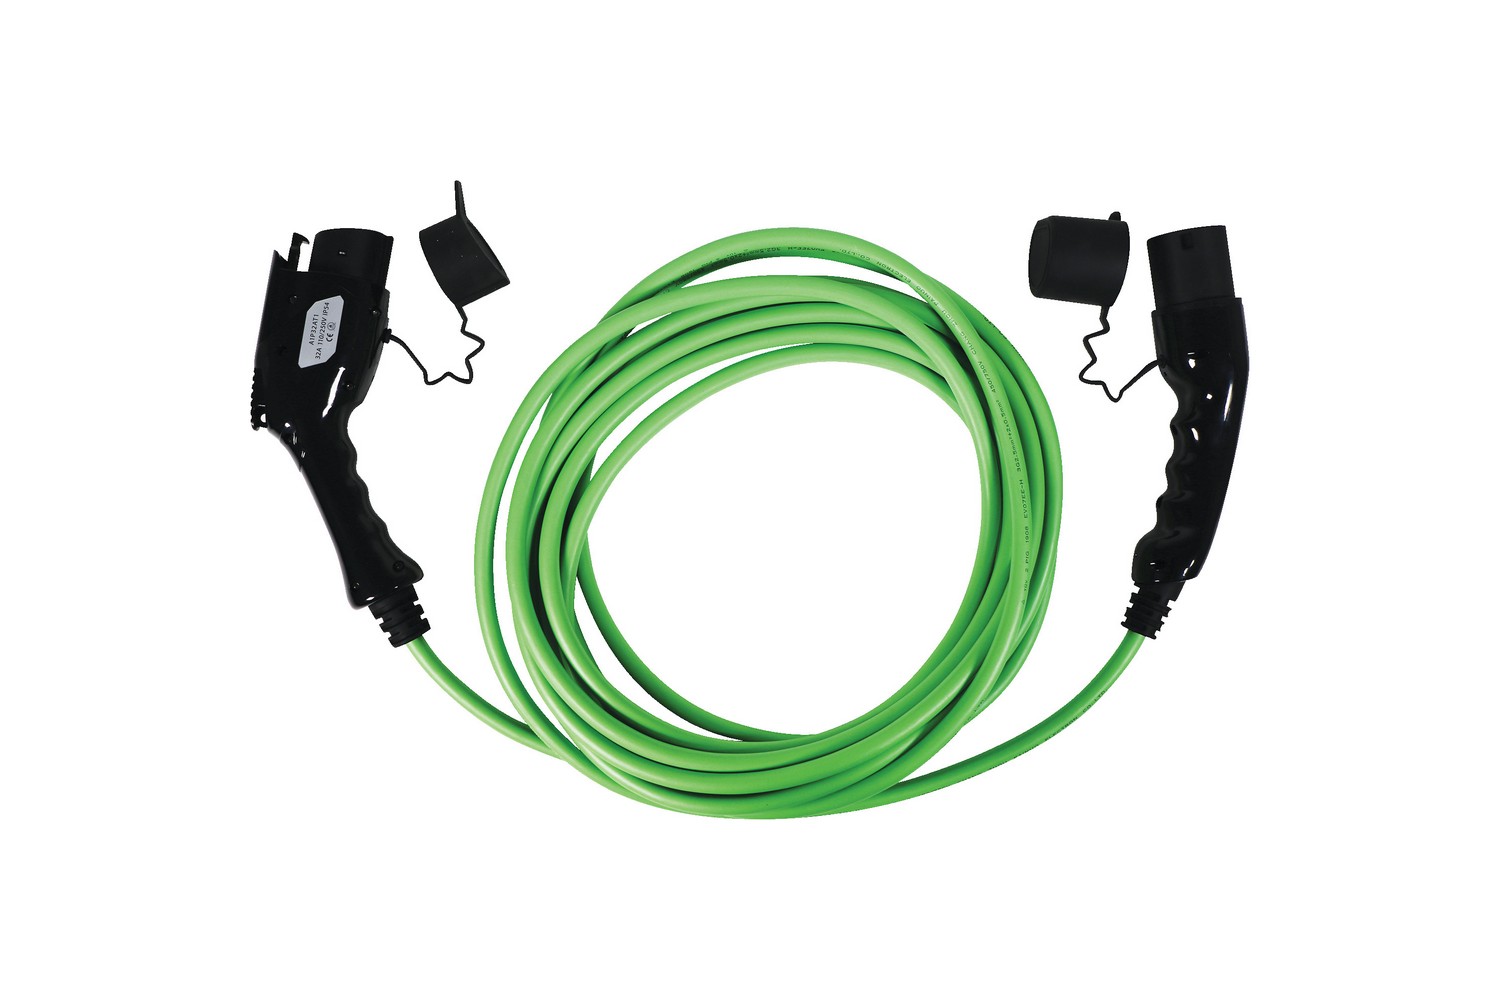 Charging cable EV type 1 - 2 1-phase 16A (3,7 kW) 2 meters Blaupunkt